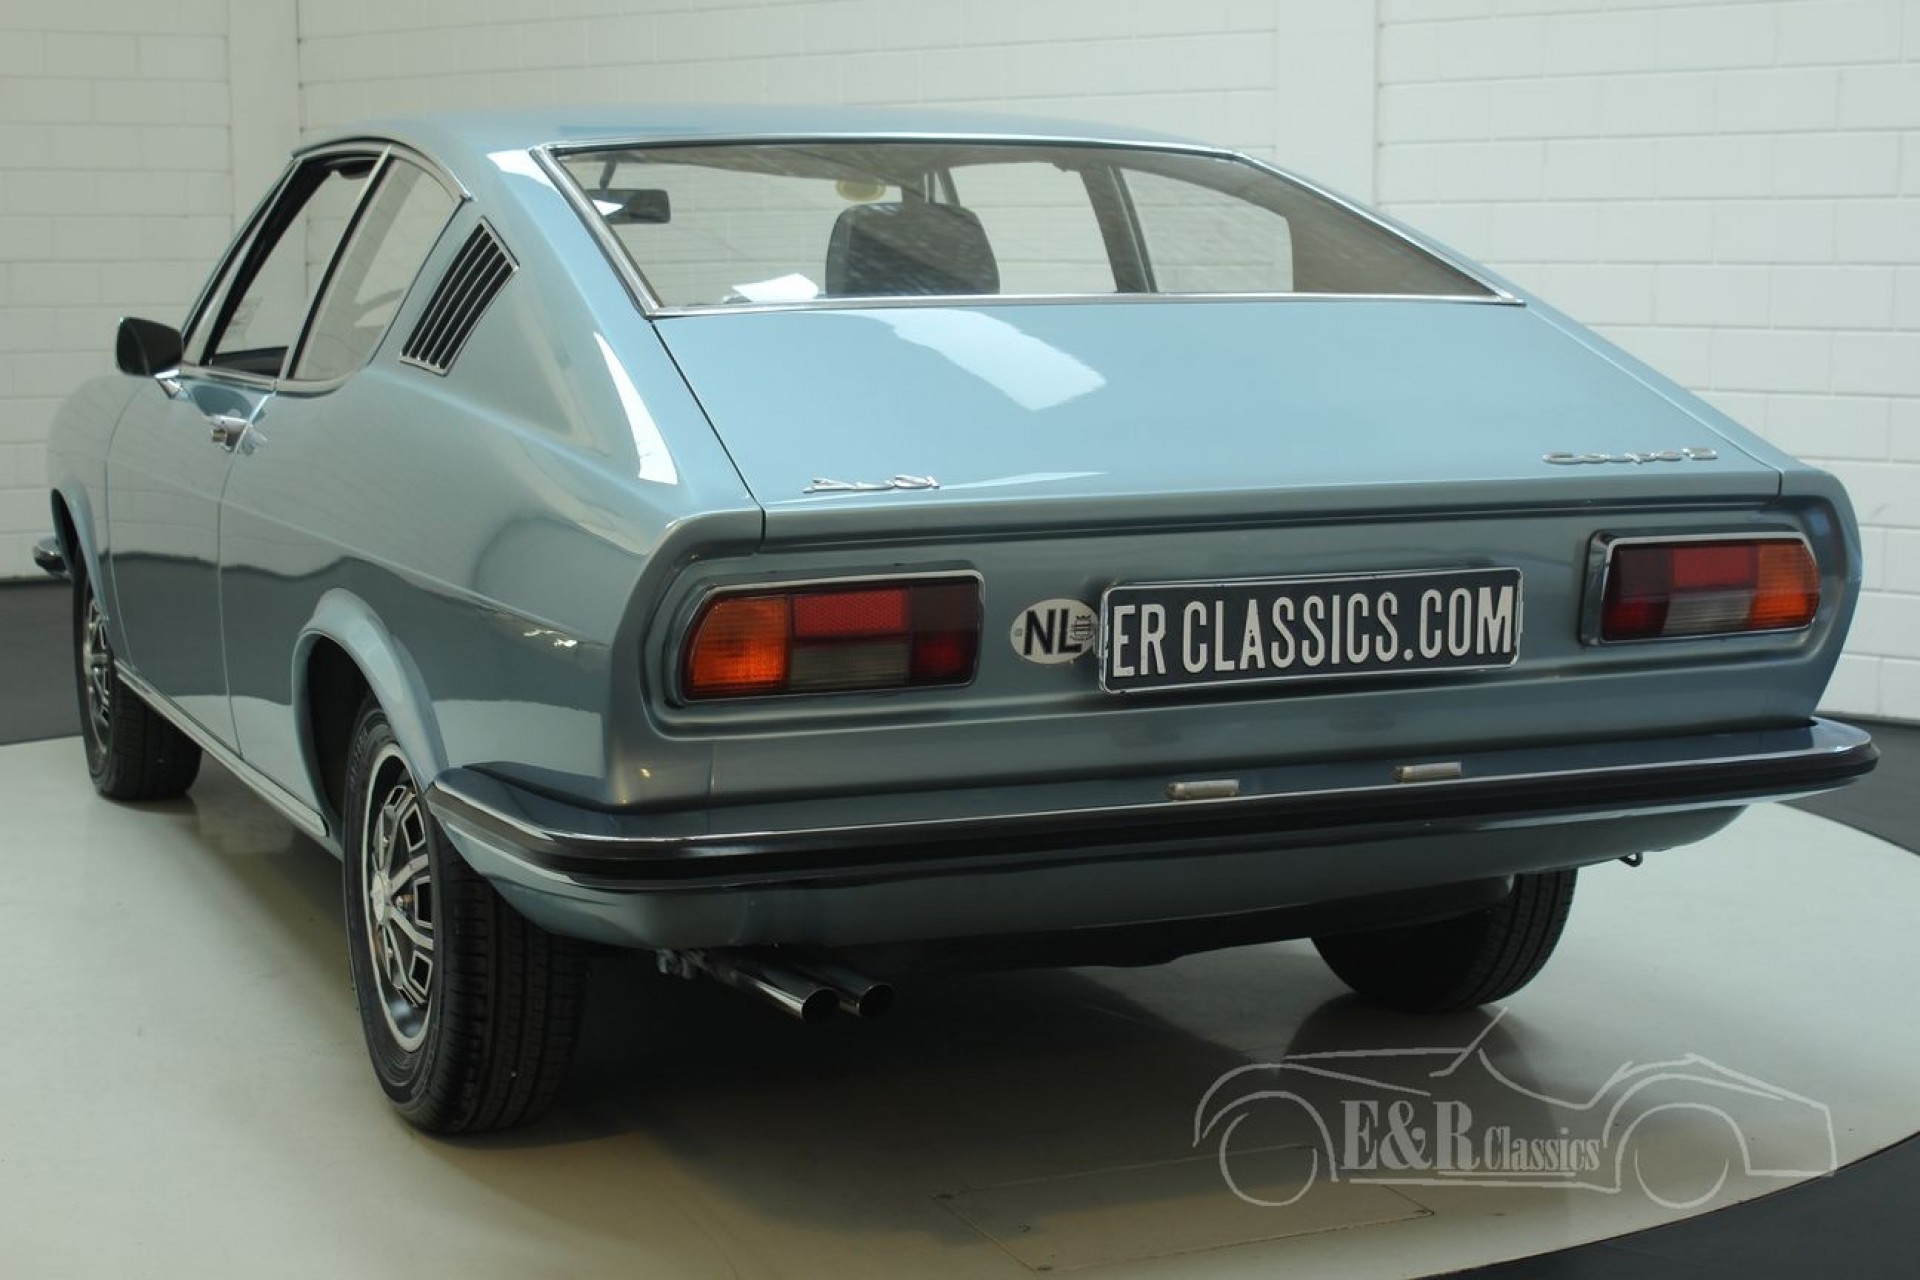 Audi 100 S Coupe 1972 for sale at Erclassics